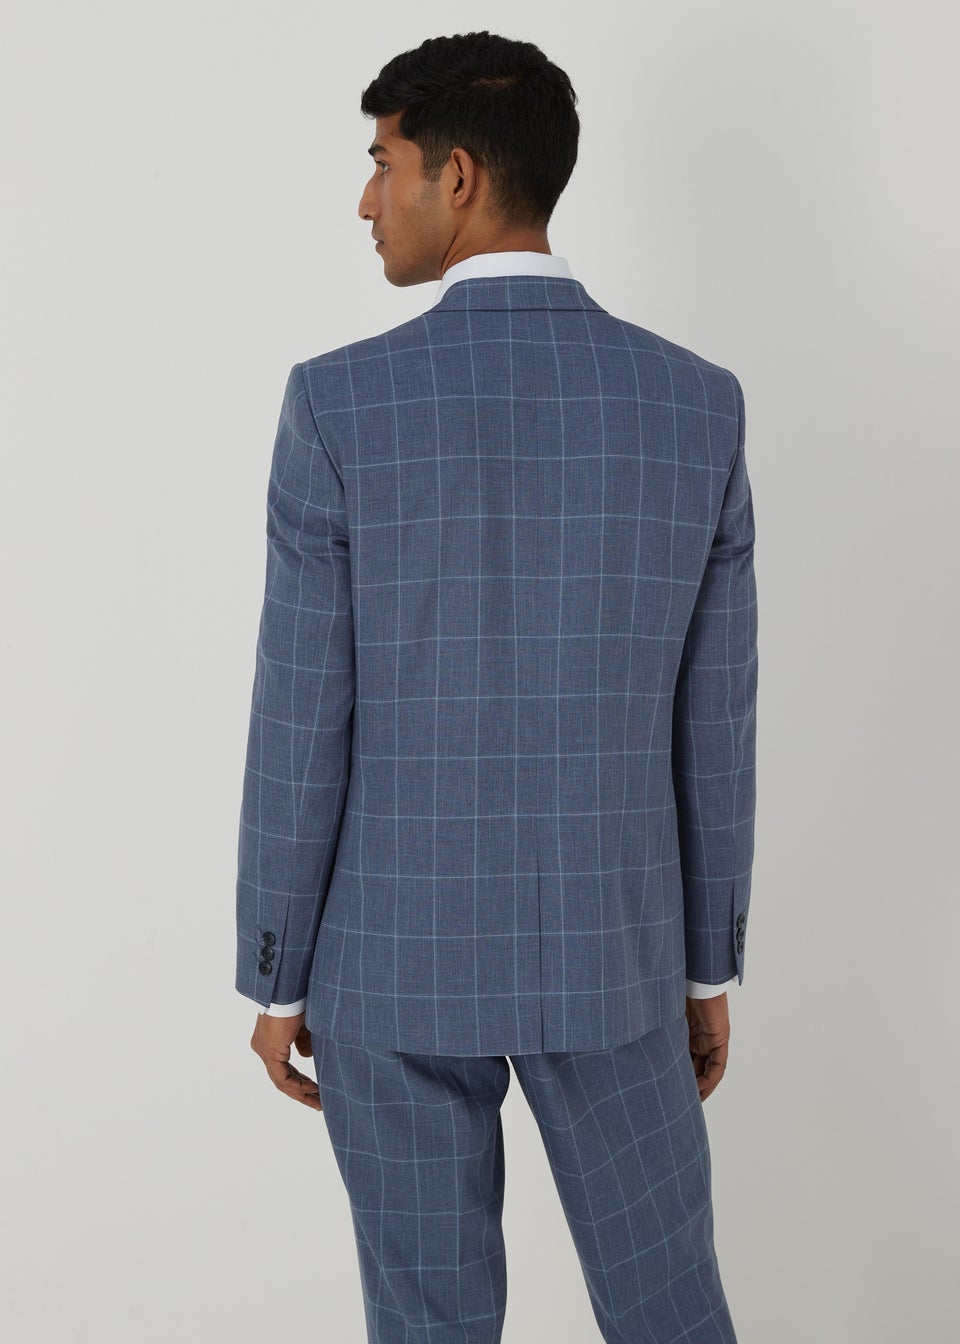 Taylor & Wright Blue Franklin Tailored Fit Jacket